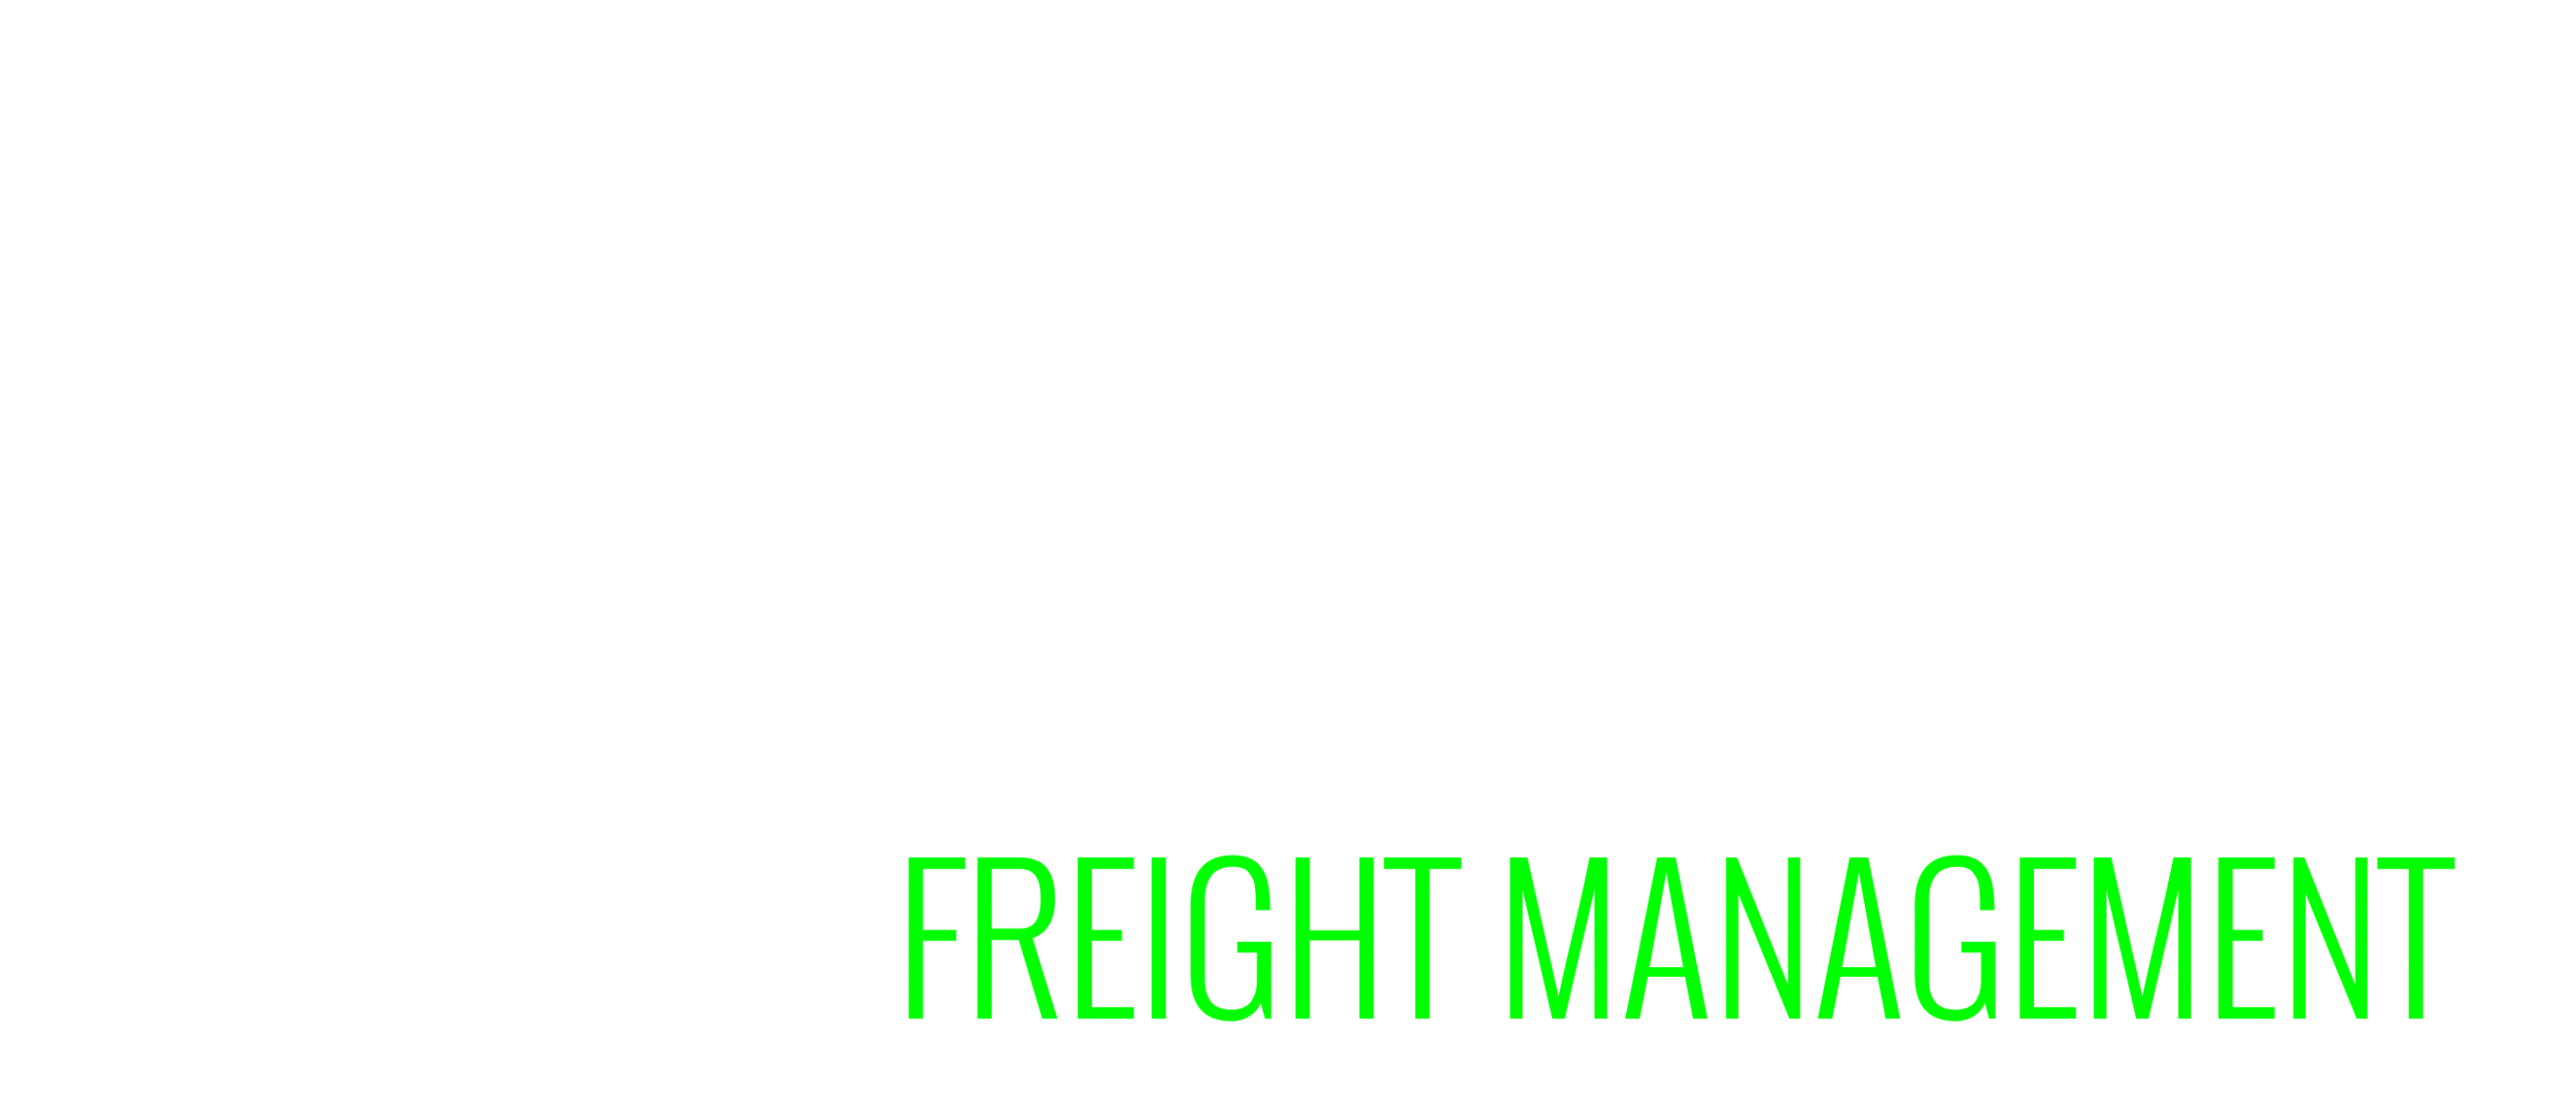 Ward Logistics Logo - Ward in large bold slanted font; Logistics in small white font, and Freight Management in apple green